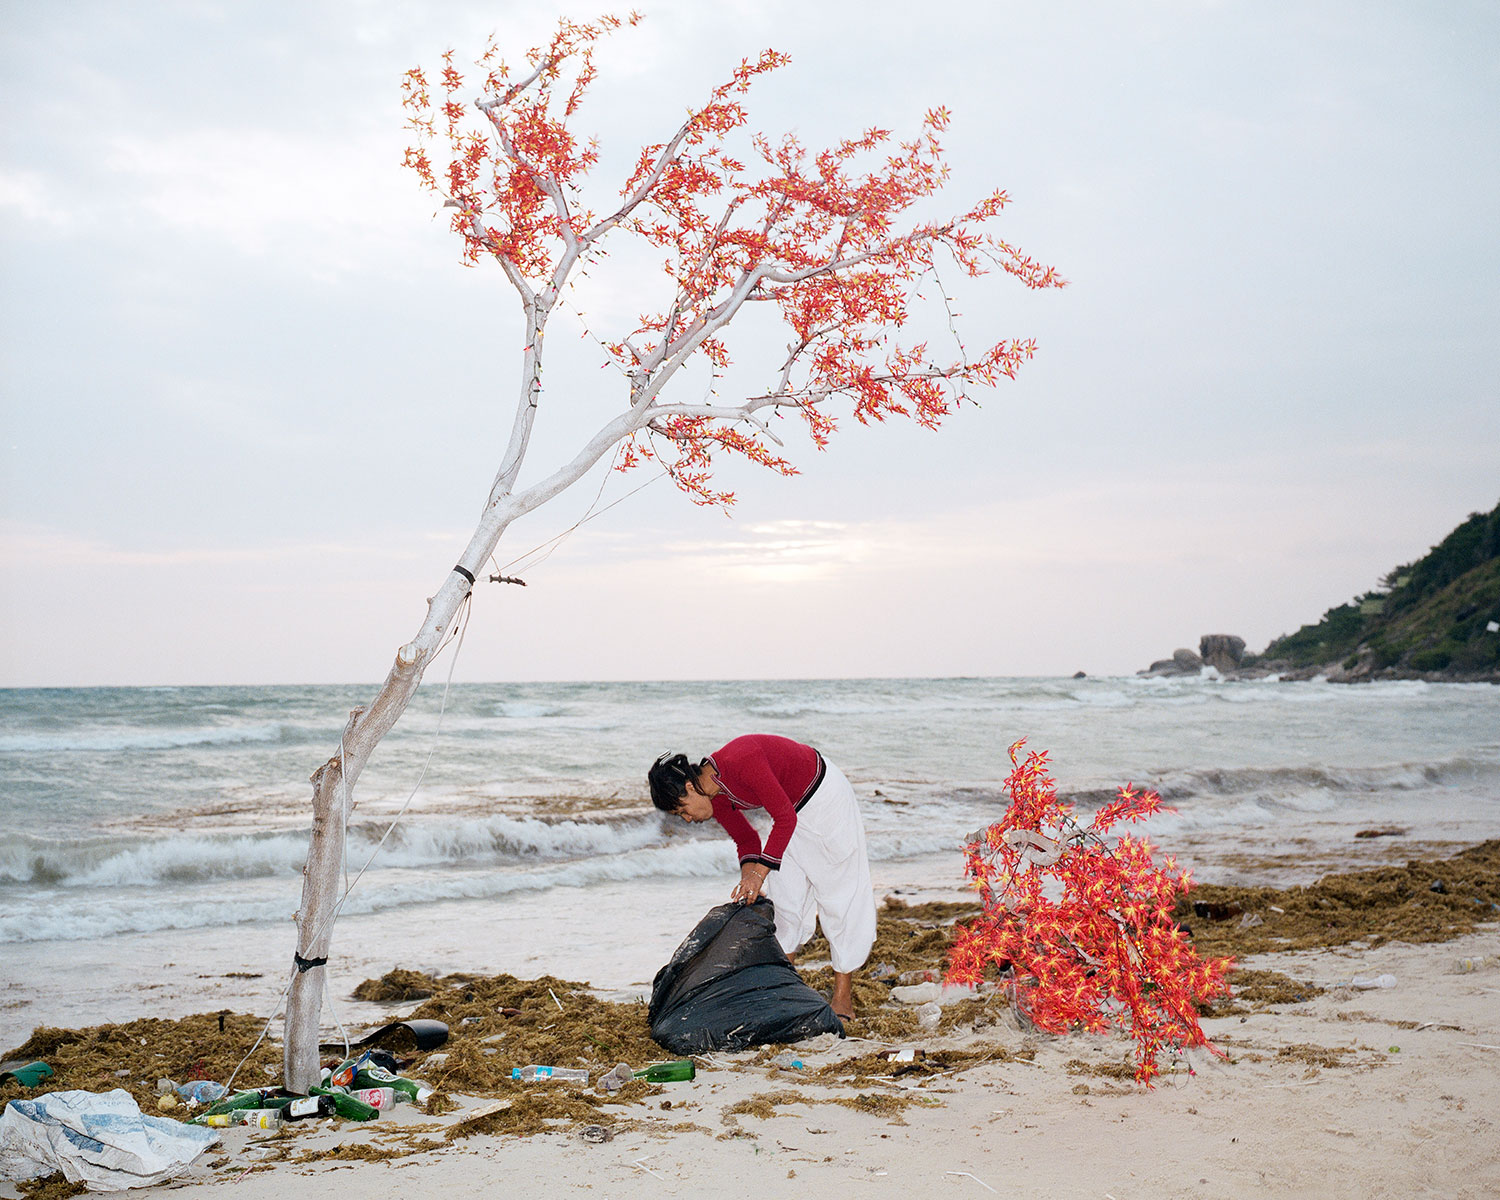 A local Thai woman cleans up the beach after the New Year’s Full Moon Party in Hat Rin, Thailand, January 2008.